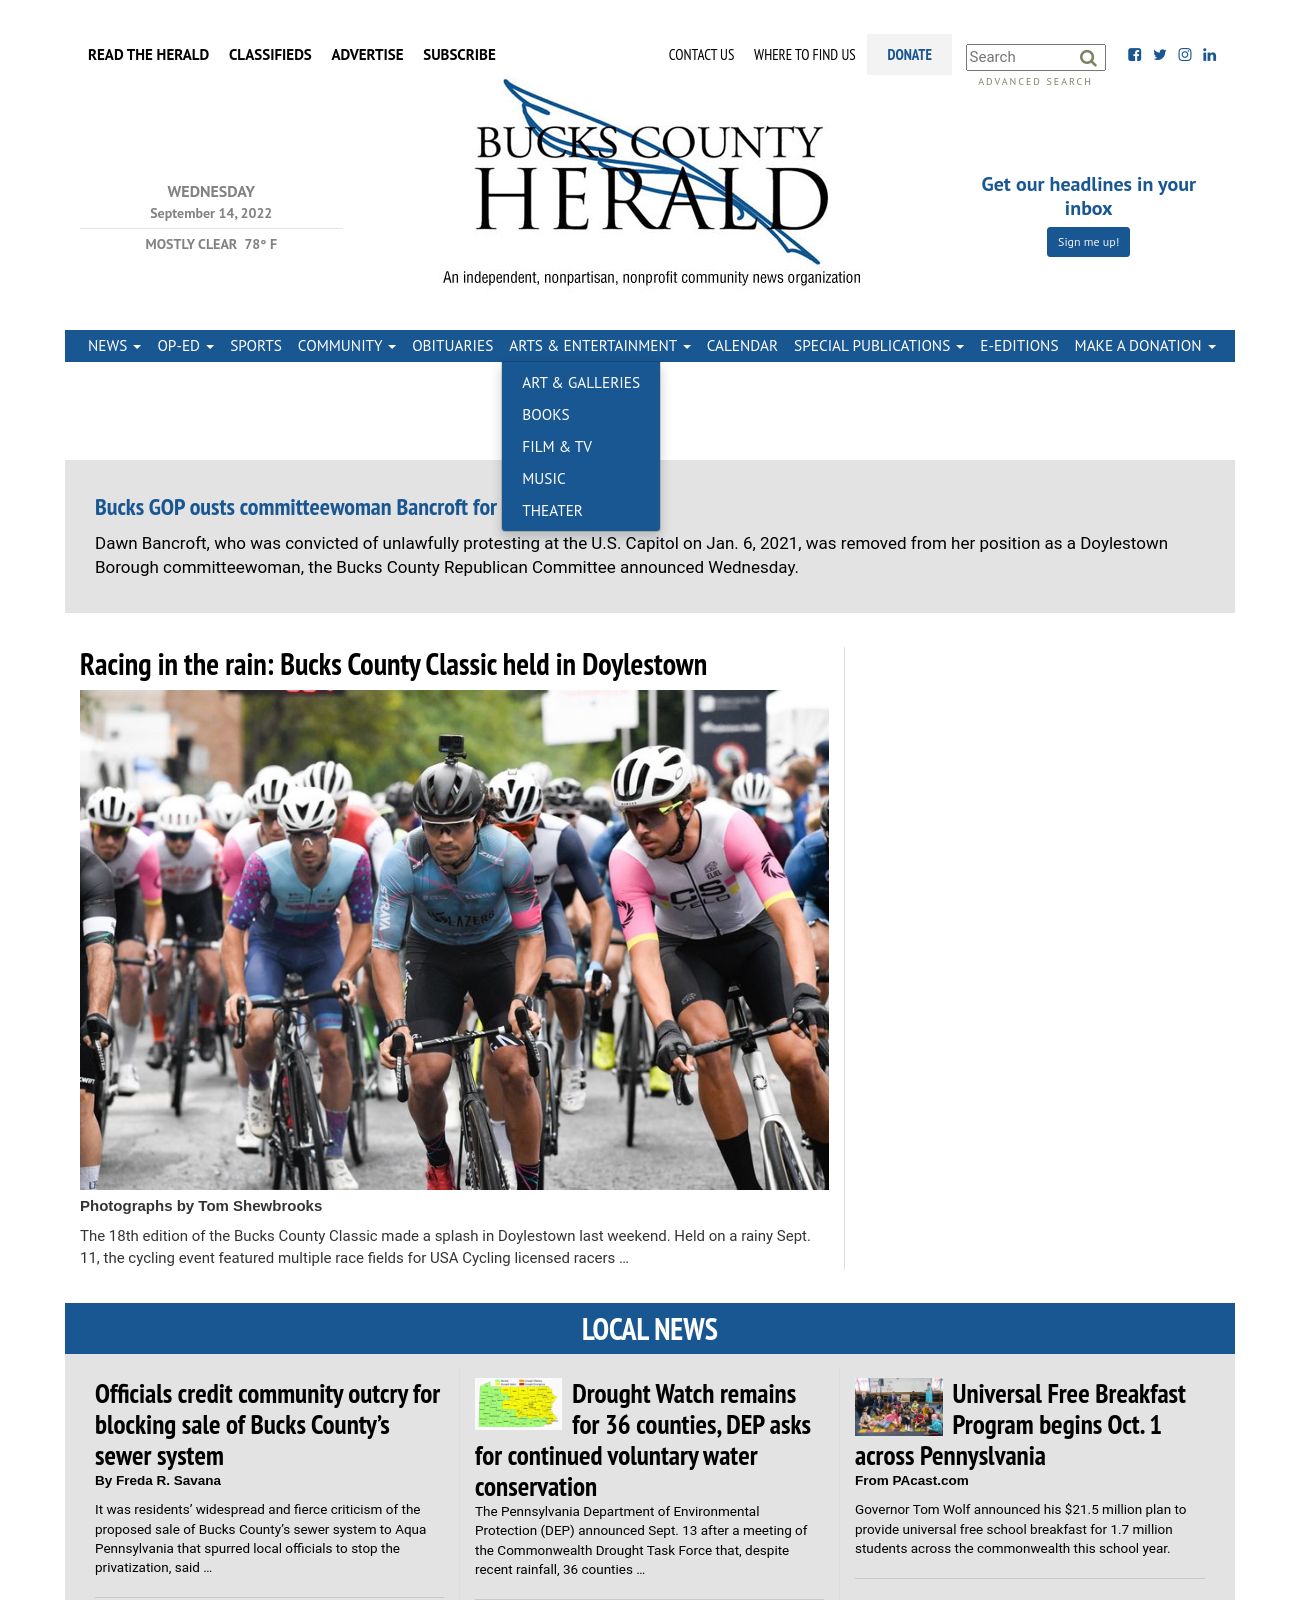 Bucks County Herald at 2022-09-14 19:02:52-04:00 local time